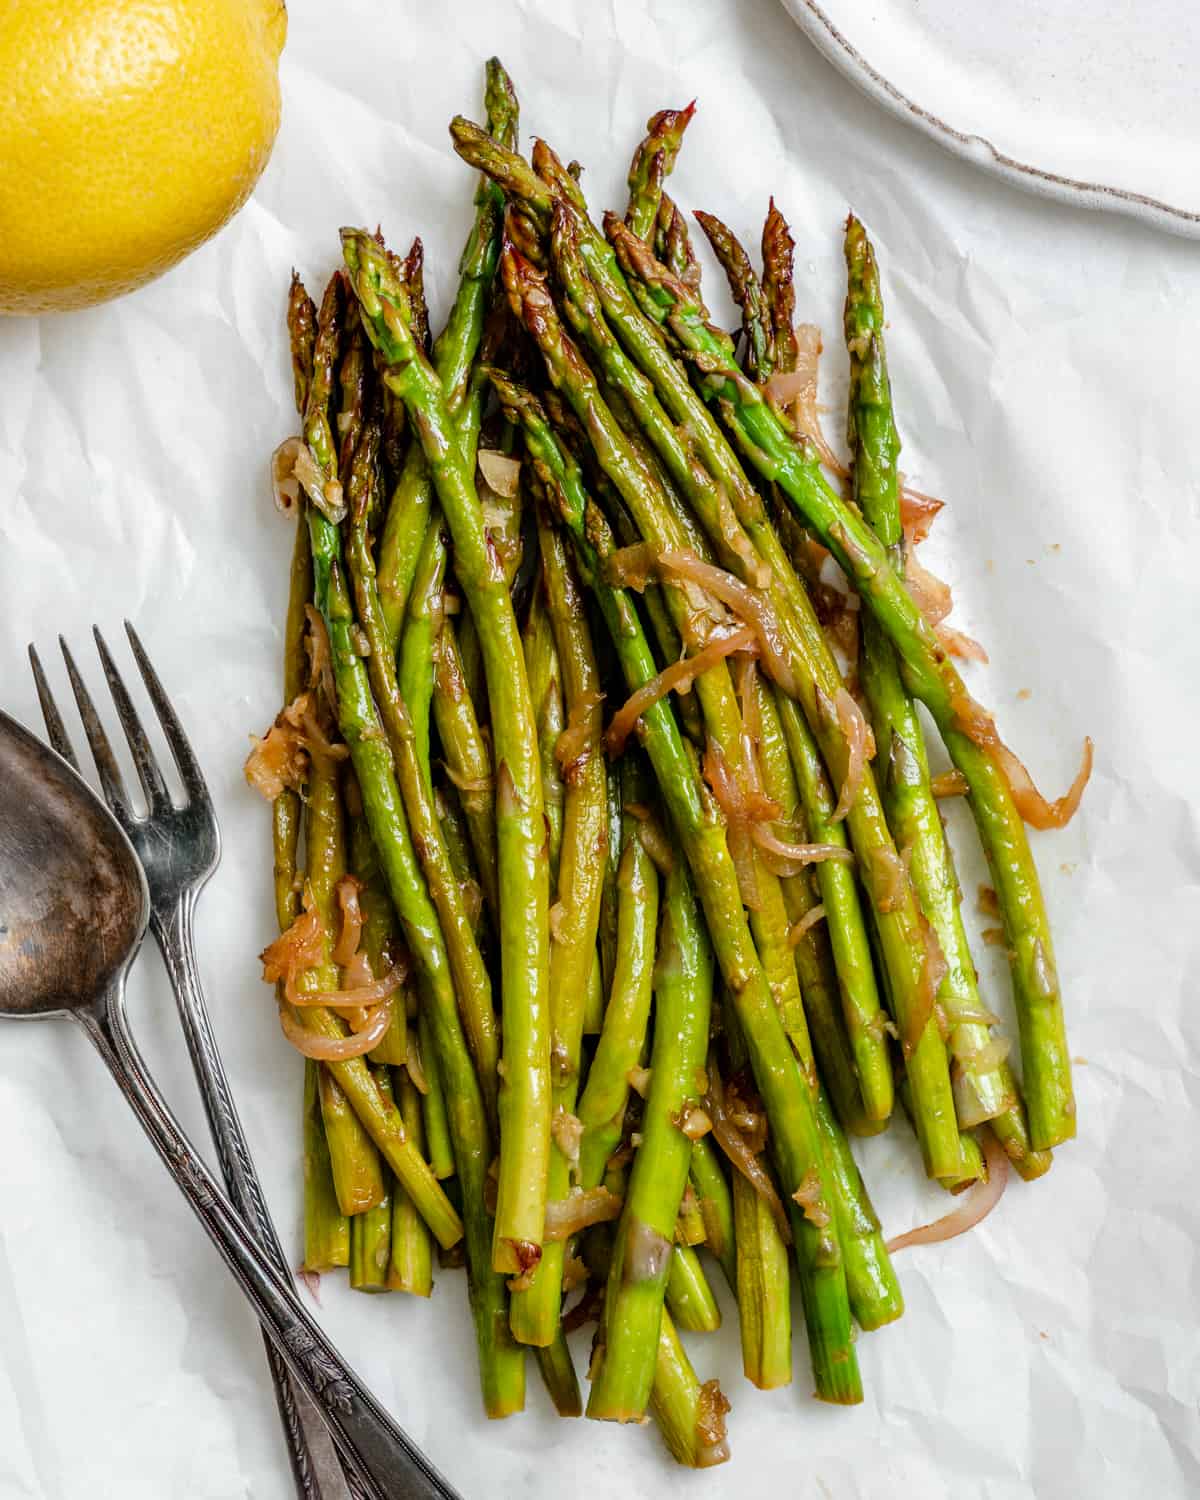 completed Sauteed Asparagus with Lemon and Garlic against a white background 